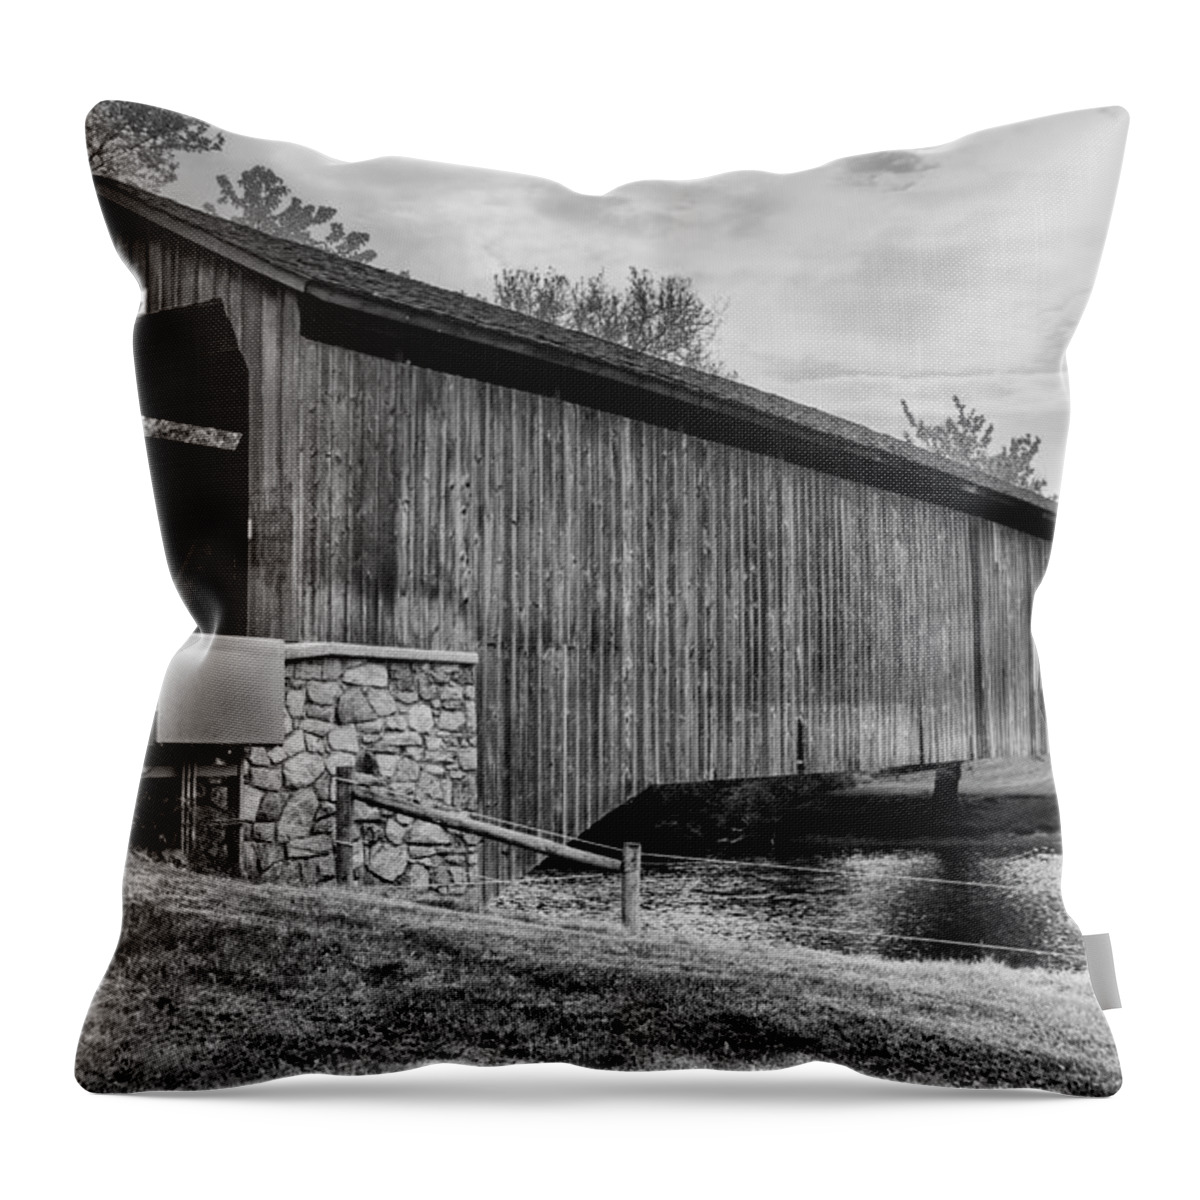 Bridges Throw Pillow featuring the photograph Hunsecker's Mill Bridge by Guy Whiteley